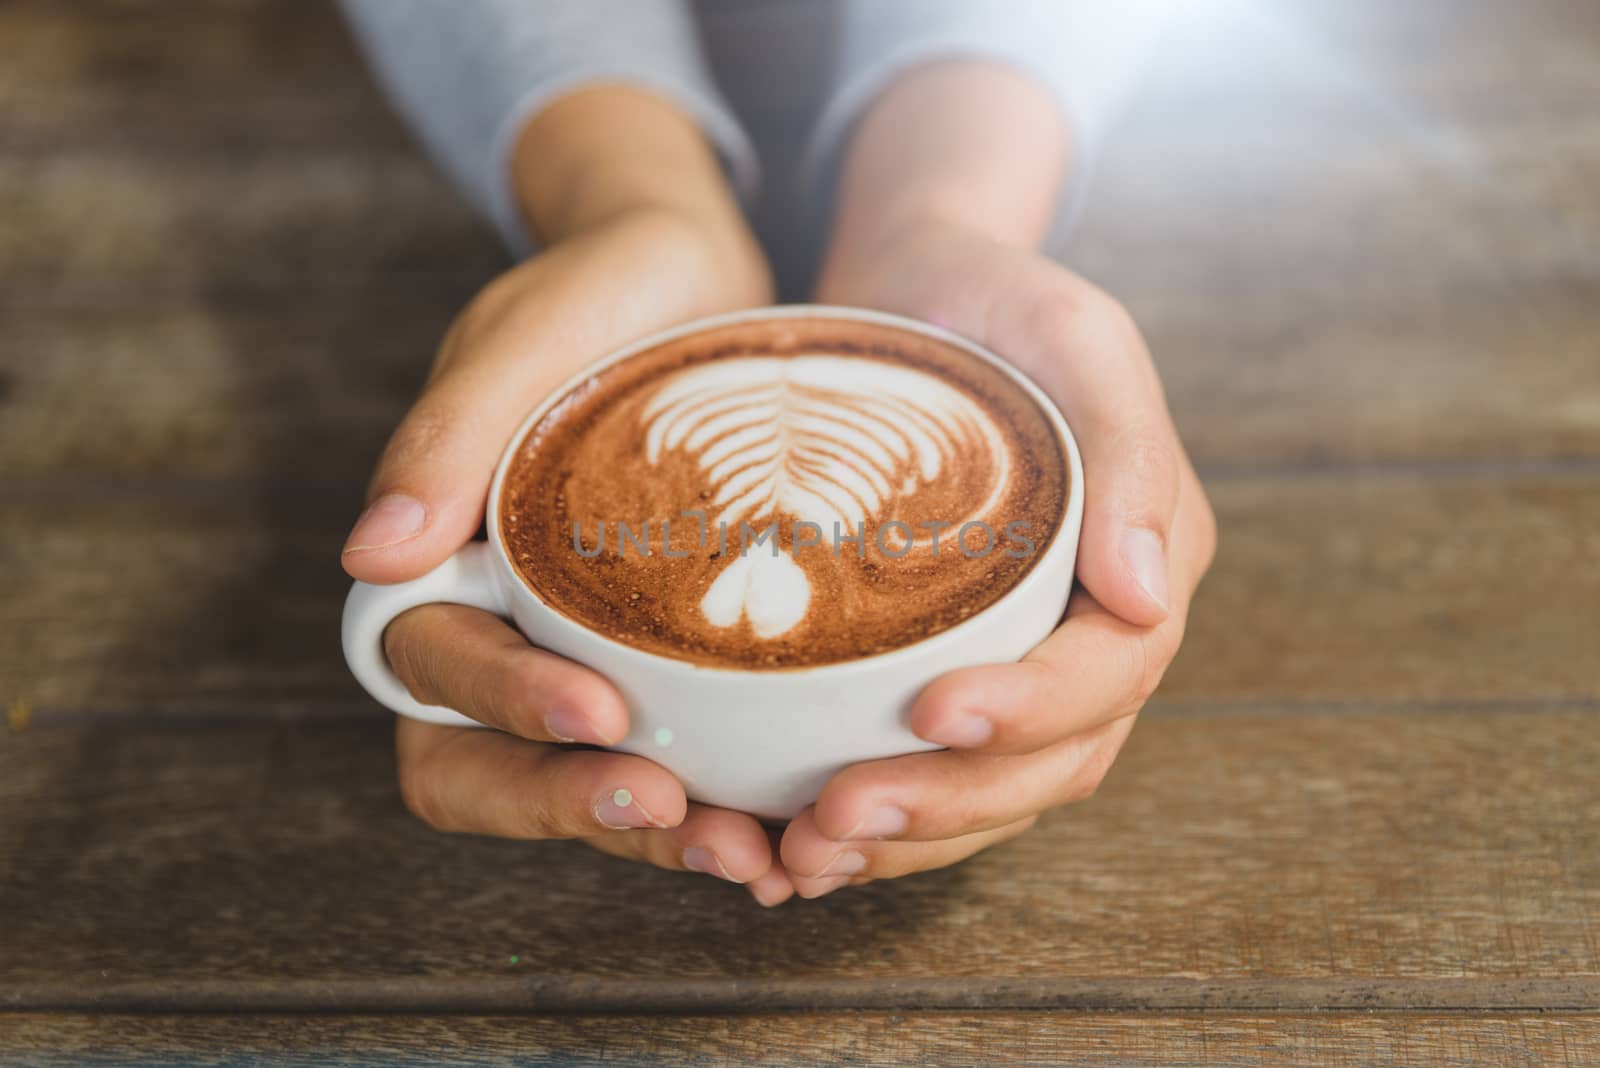 Woman hands holding cup of hot coffee latte cappuccino with heart shaped. Love, Wedding and Valentines day concept.